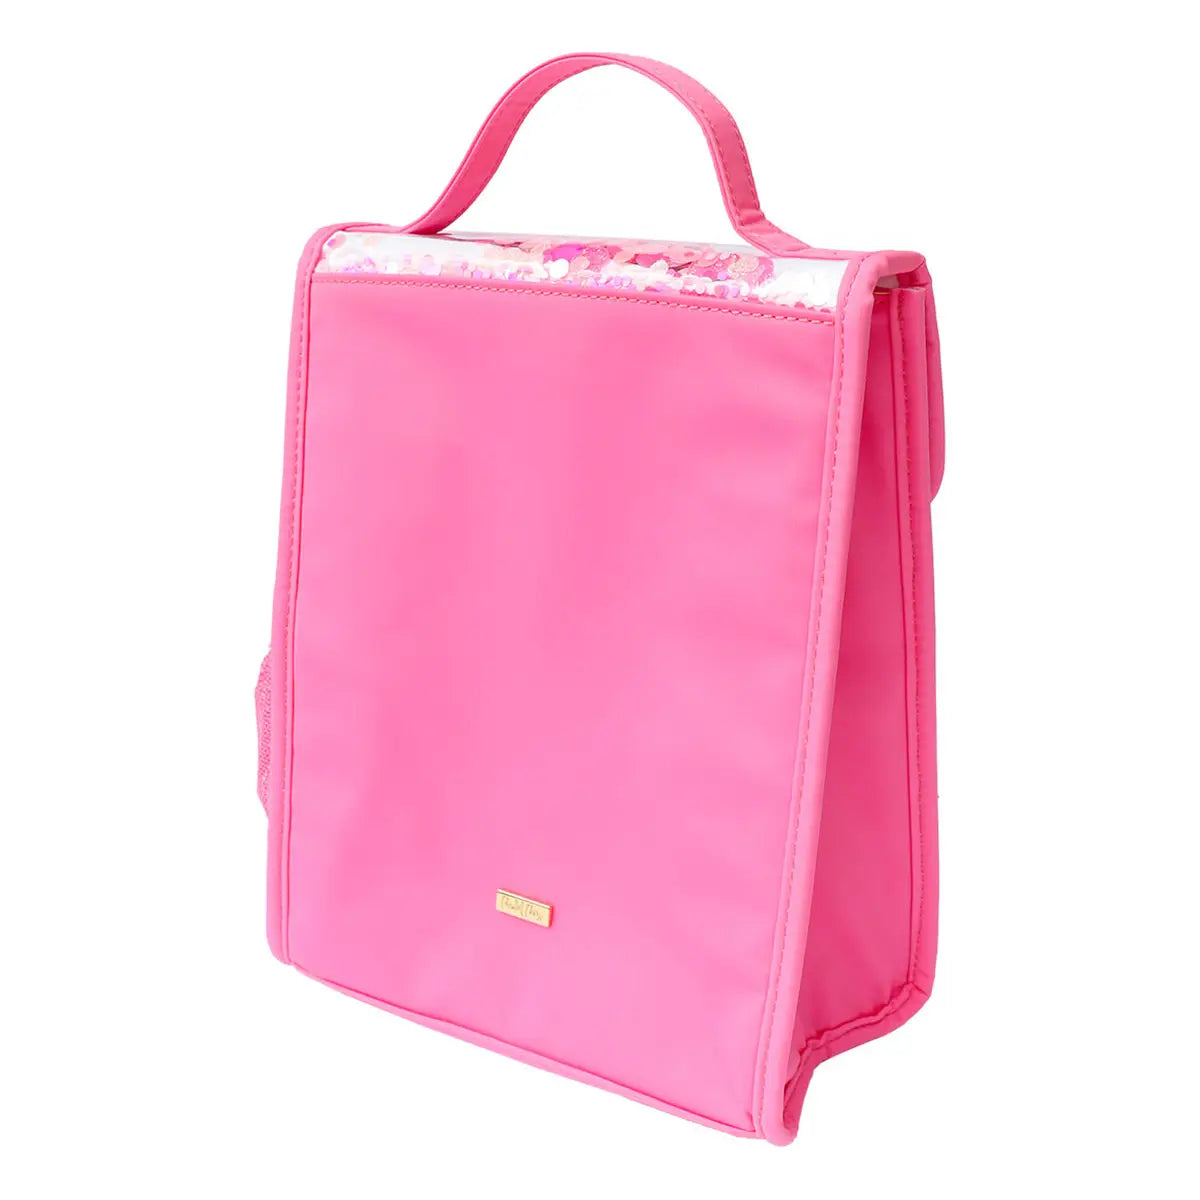 Pink Party Confetti Lunchbag